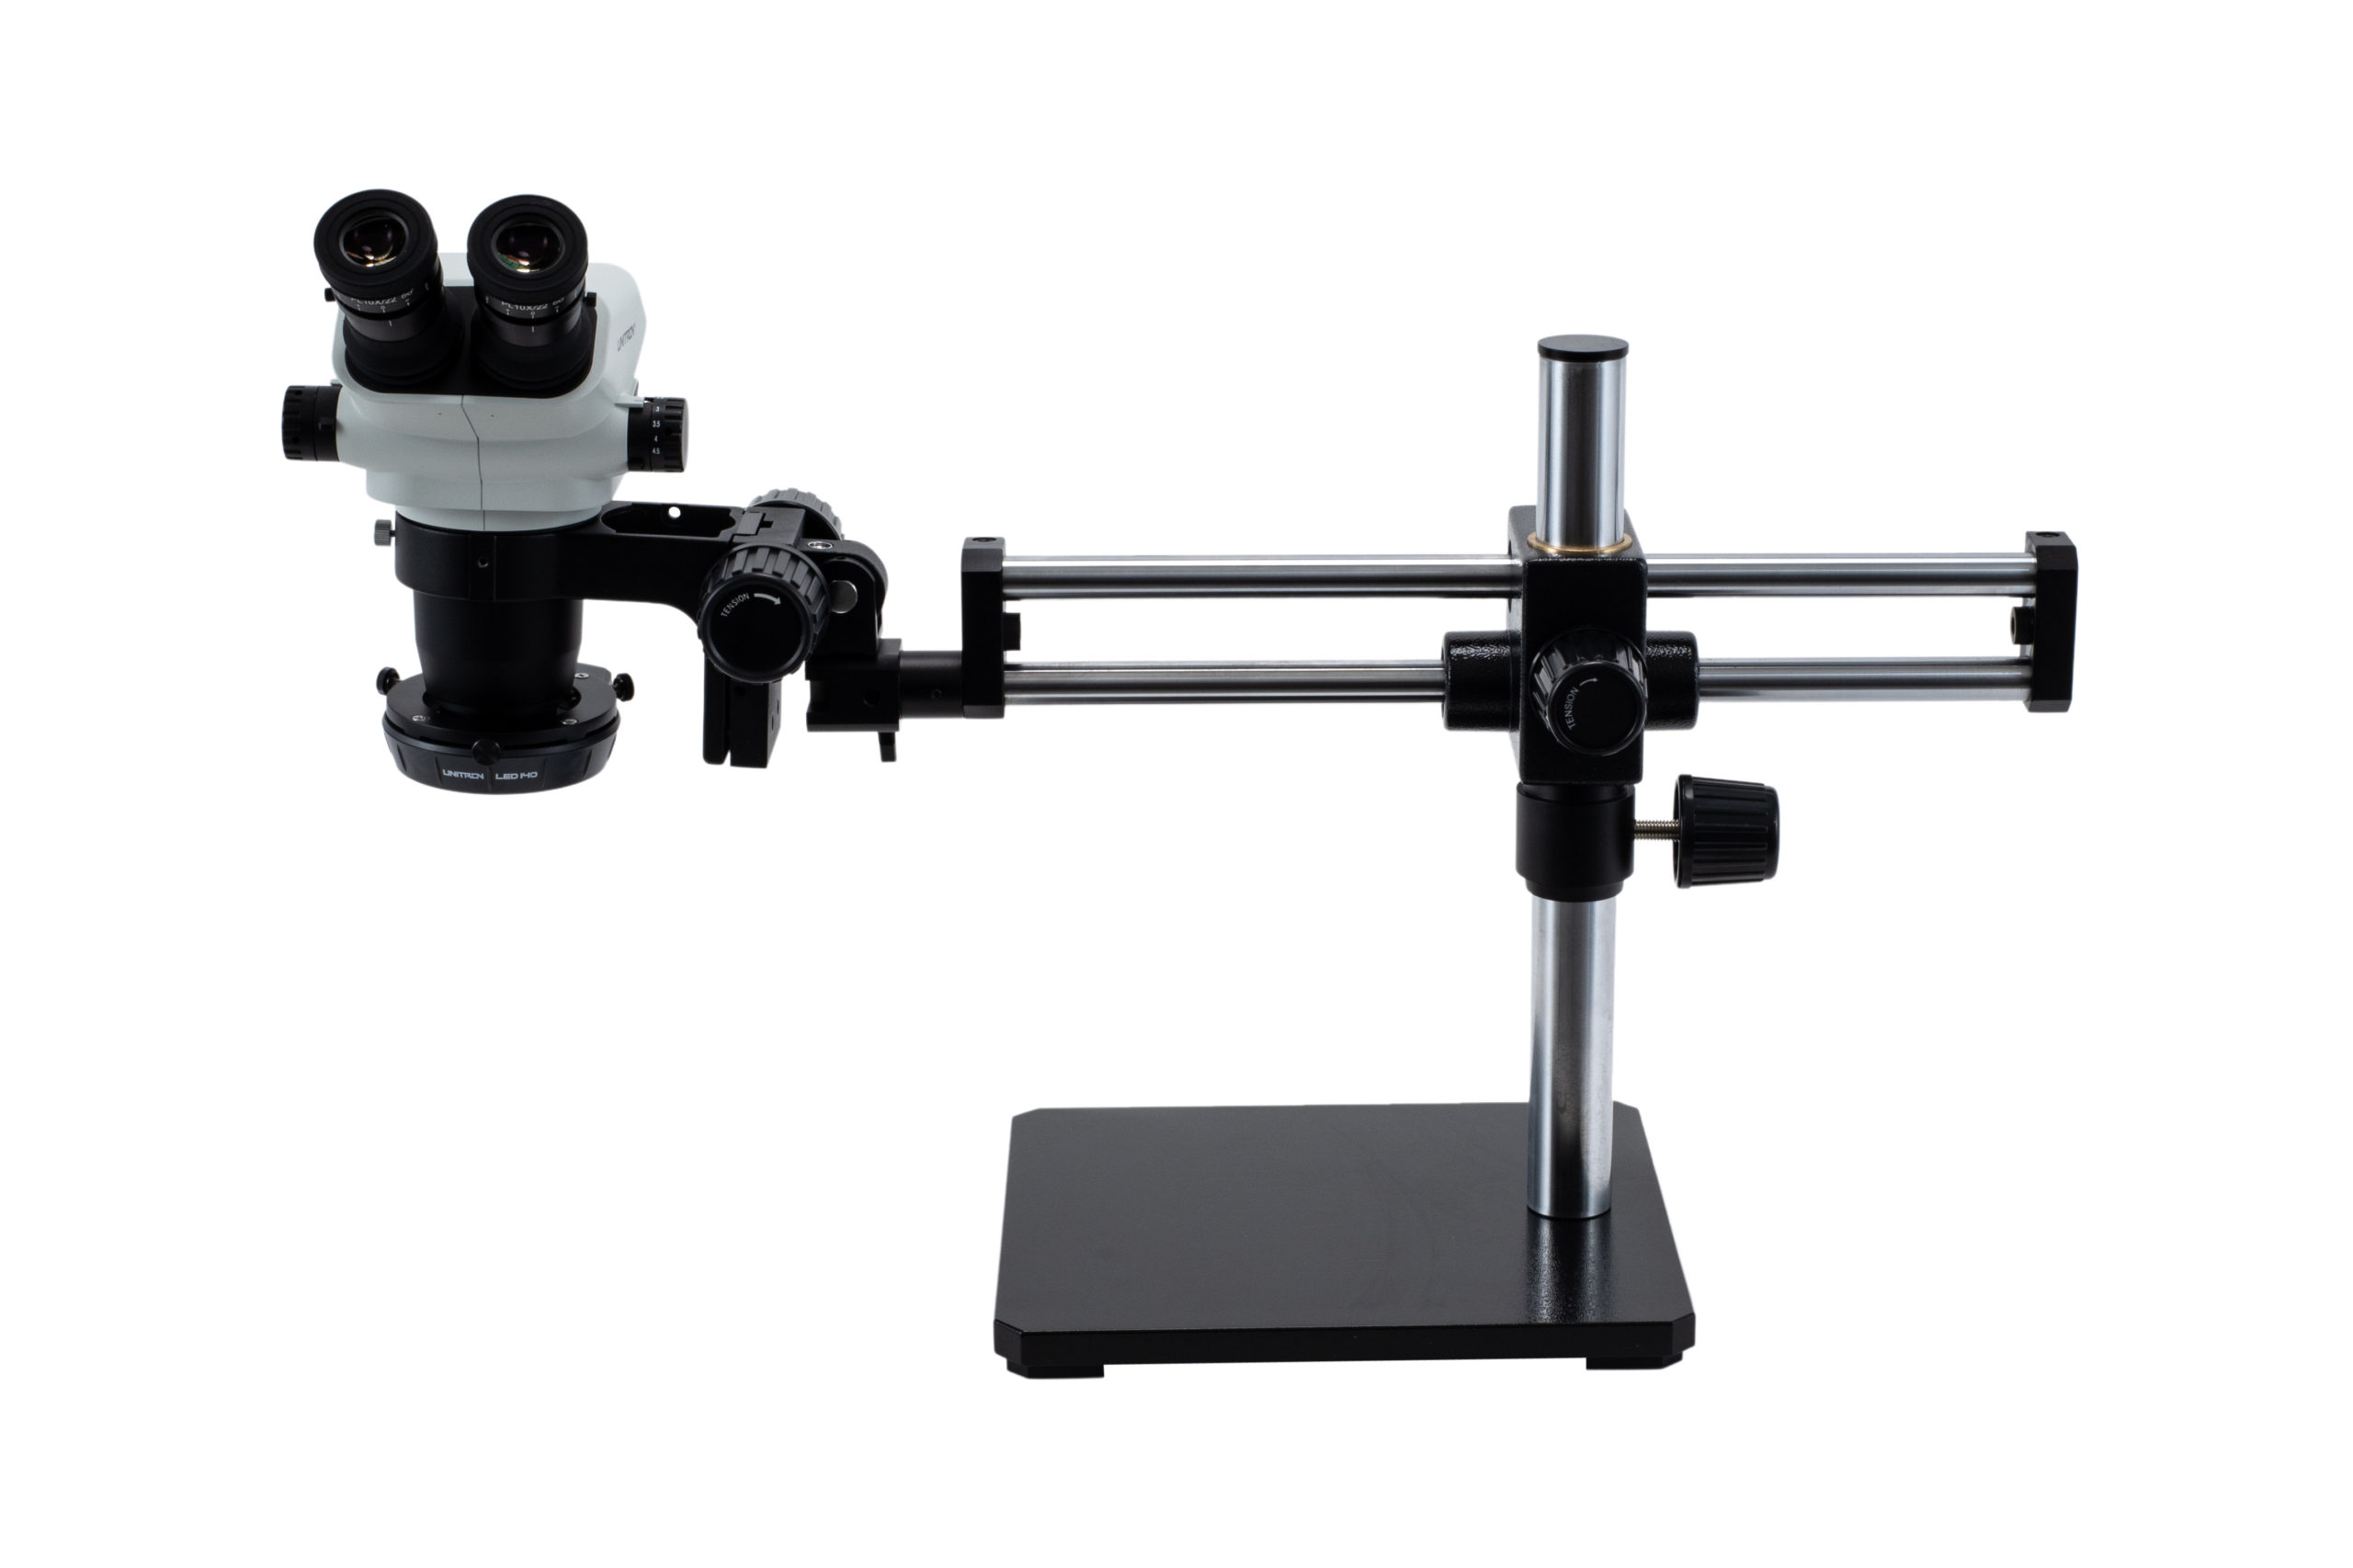 UNITRON Introduces the New Z645 Zoom Stereo Microscope